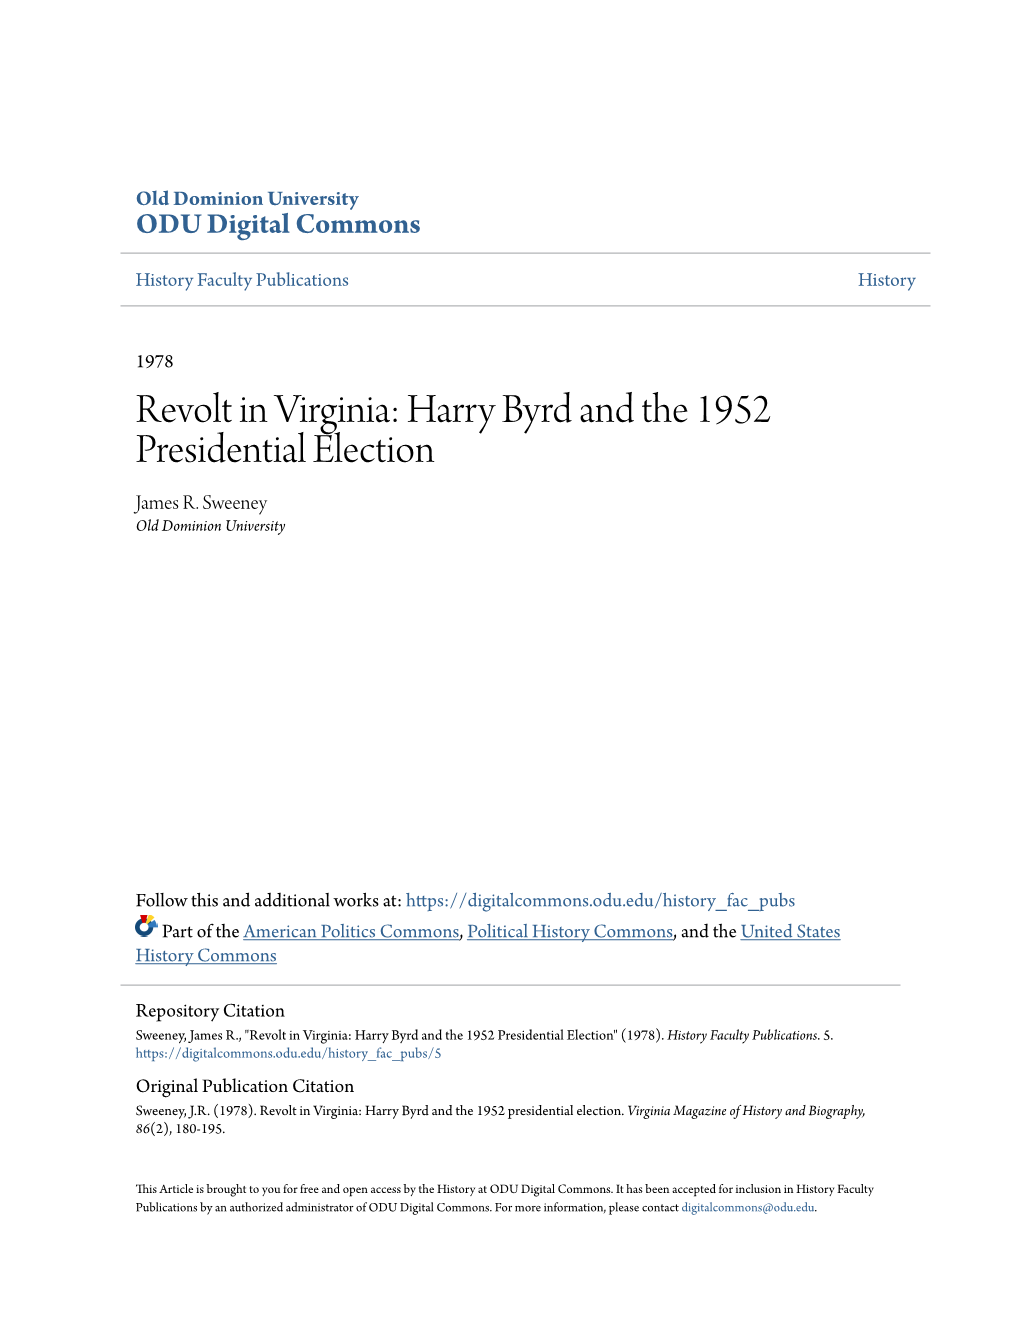 Harry Byrd and the 1952 Presidential Election James R